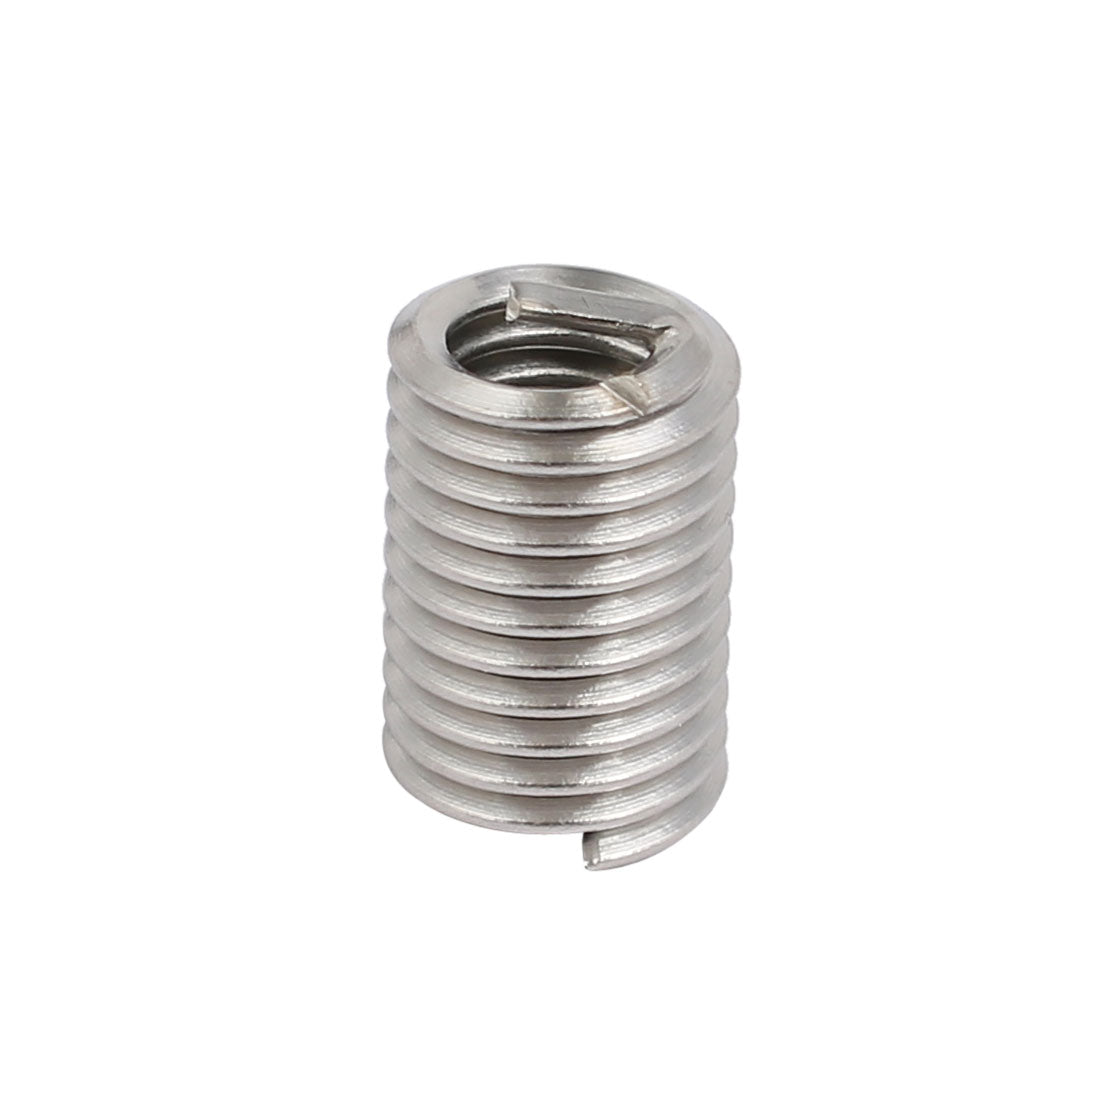 uxcell Uxcell 1/4-20x0.625" 304 Stainless Steel Helical Coil Wire Thread Insert 12pcs